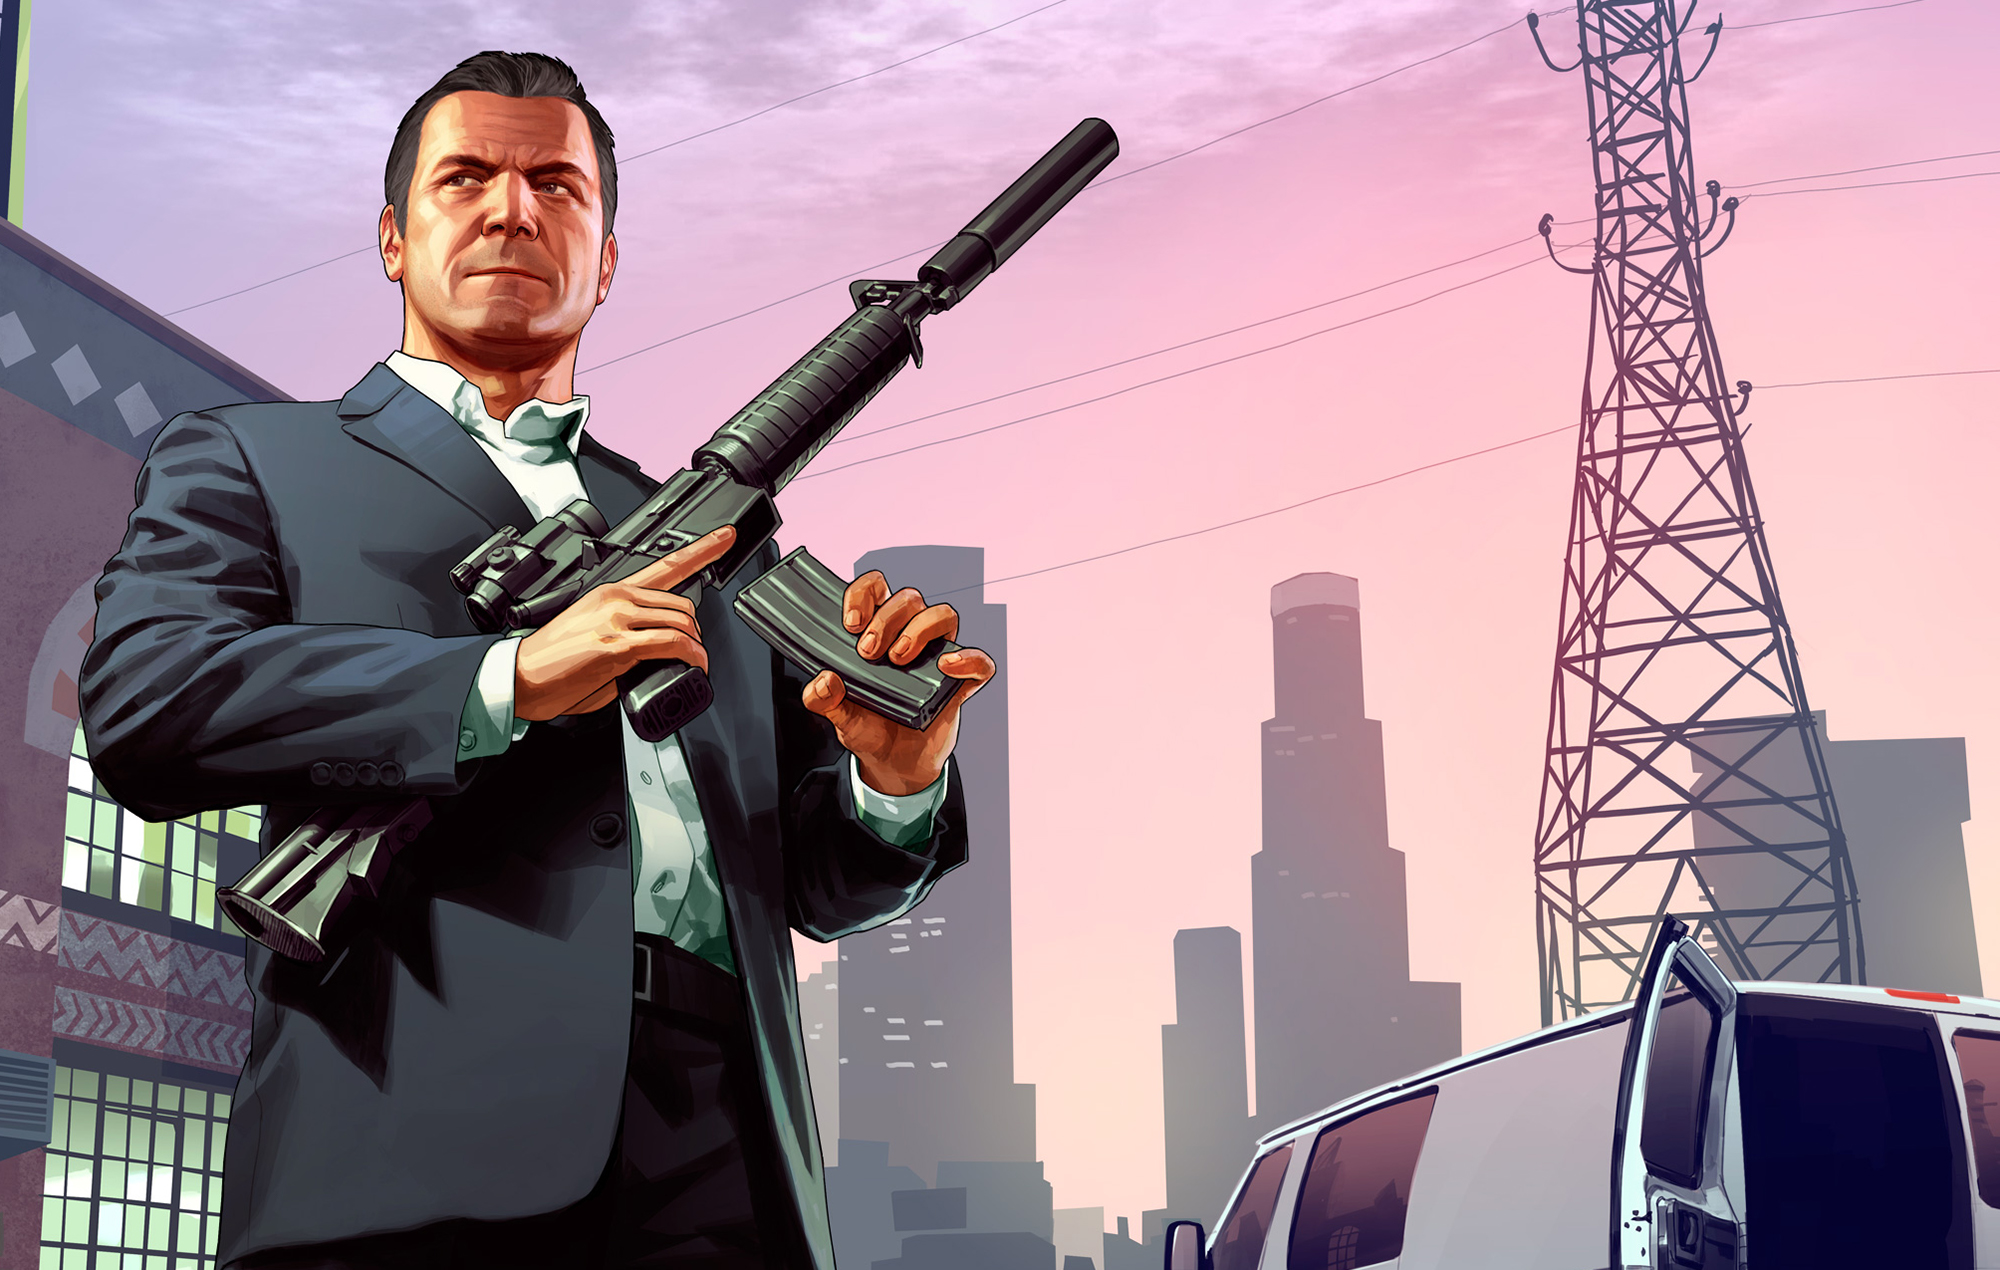 GTA 6 Source Code and Videos Leaked After Rockstar Games Hack